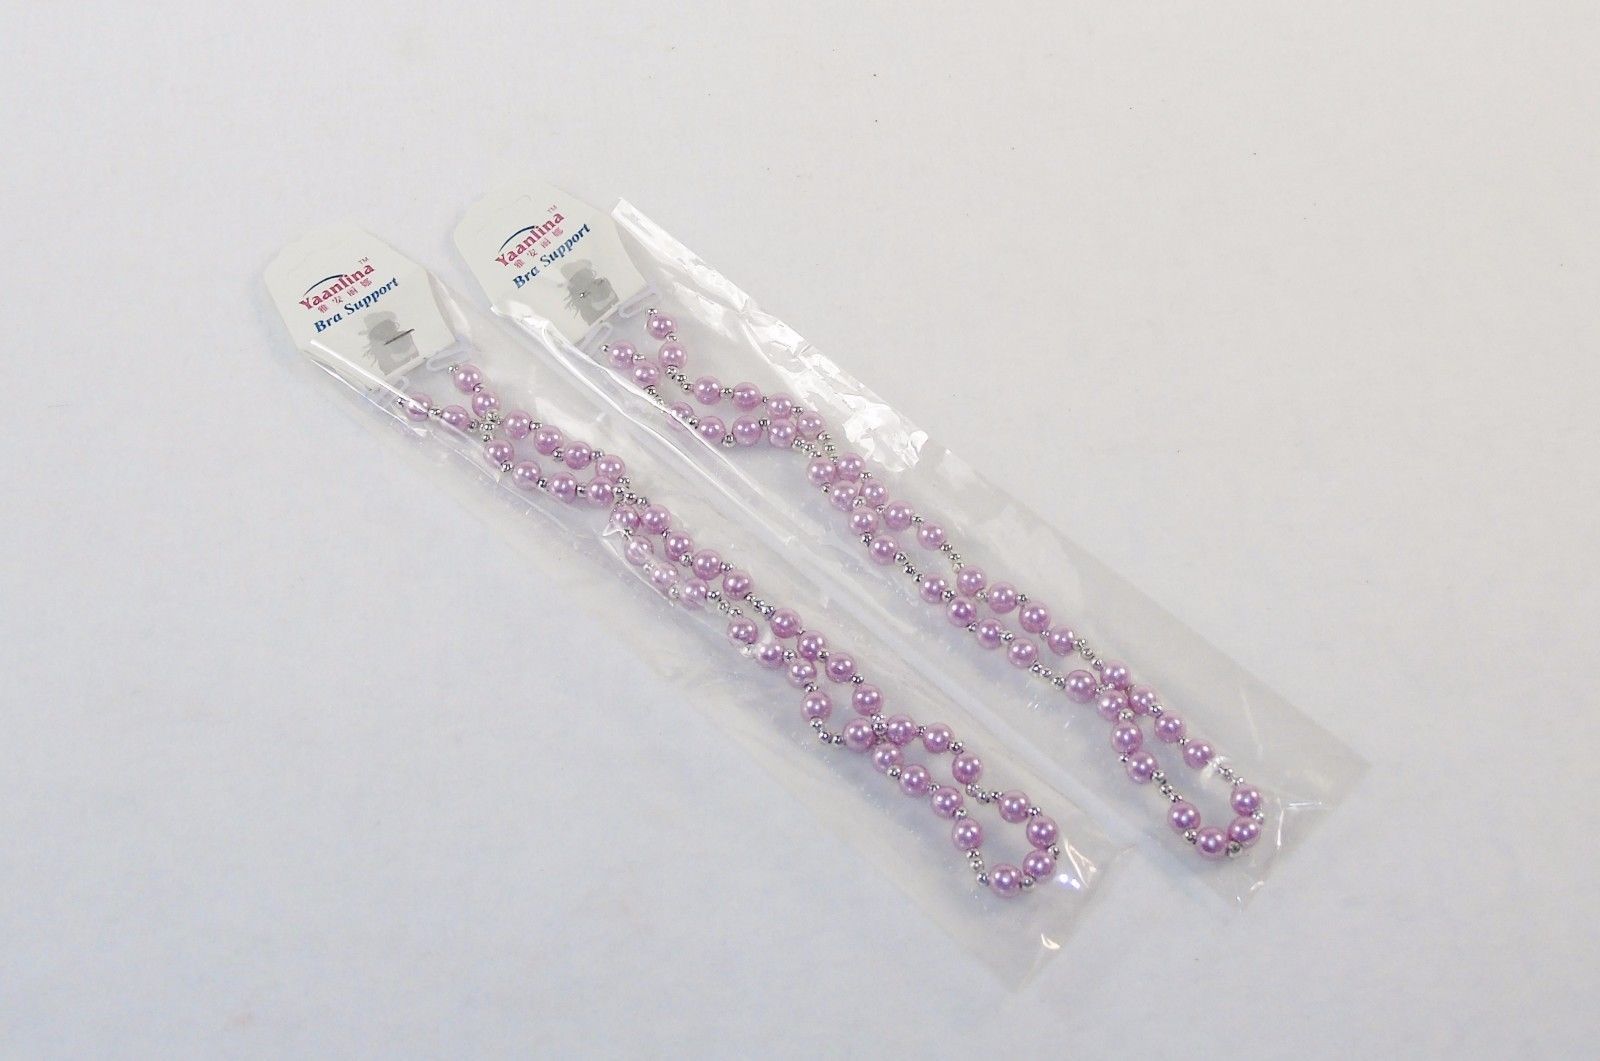 Beaded Bra Strap Clip-On Accessory, Set of 2 and 25 similar items